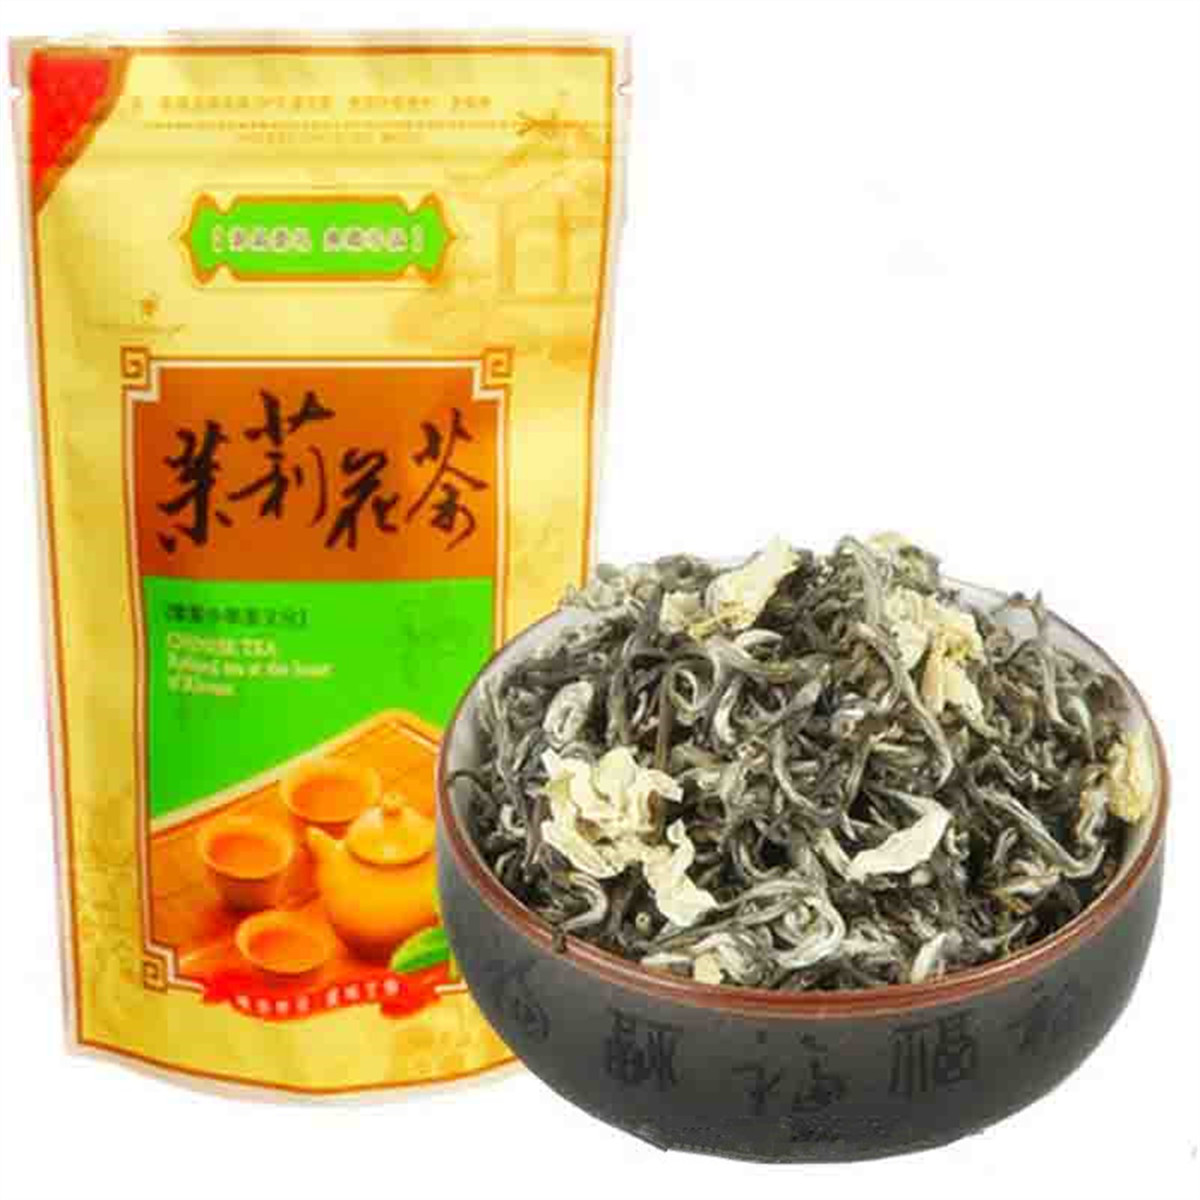 

50g Chinese Organic Green Tea Early Spring Green Tea With Jasmine Flower Maofeng Yellow Mountain Fragant New Tea Hot sales